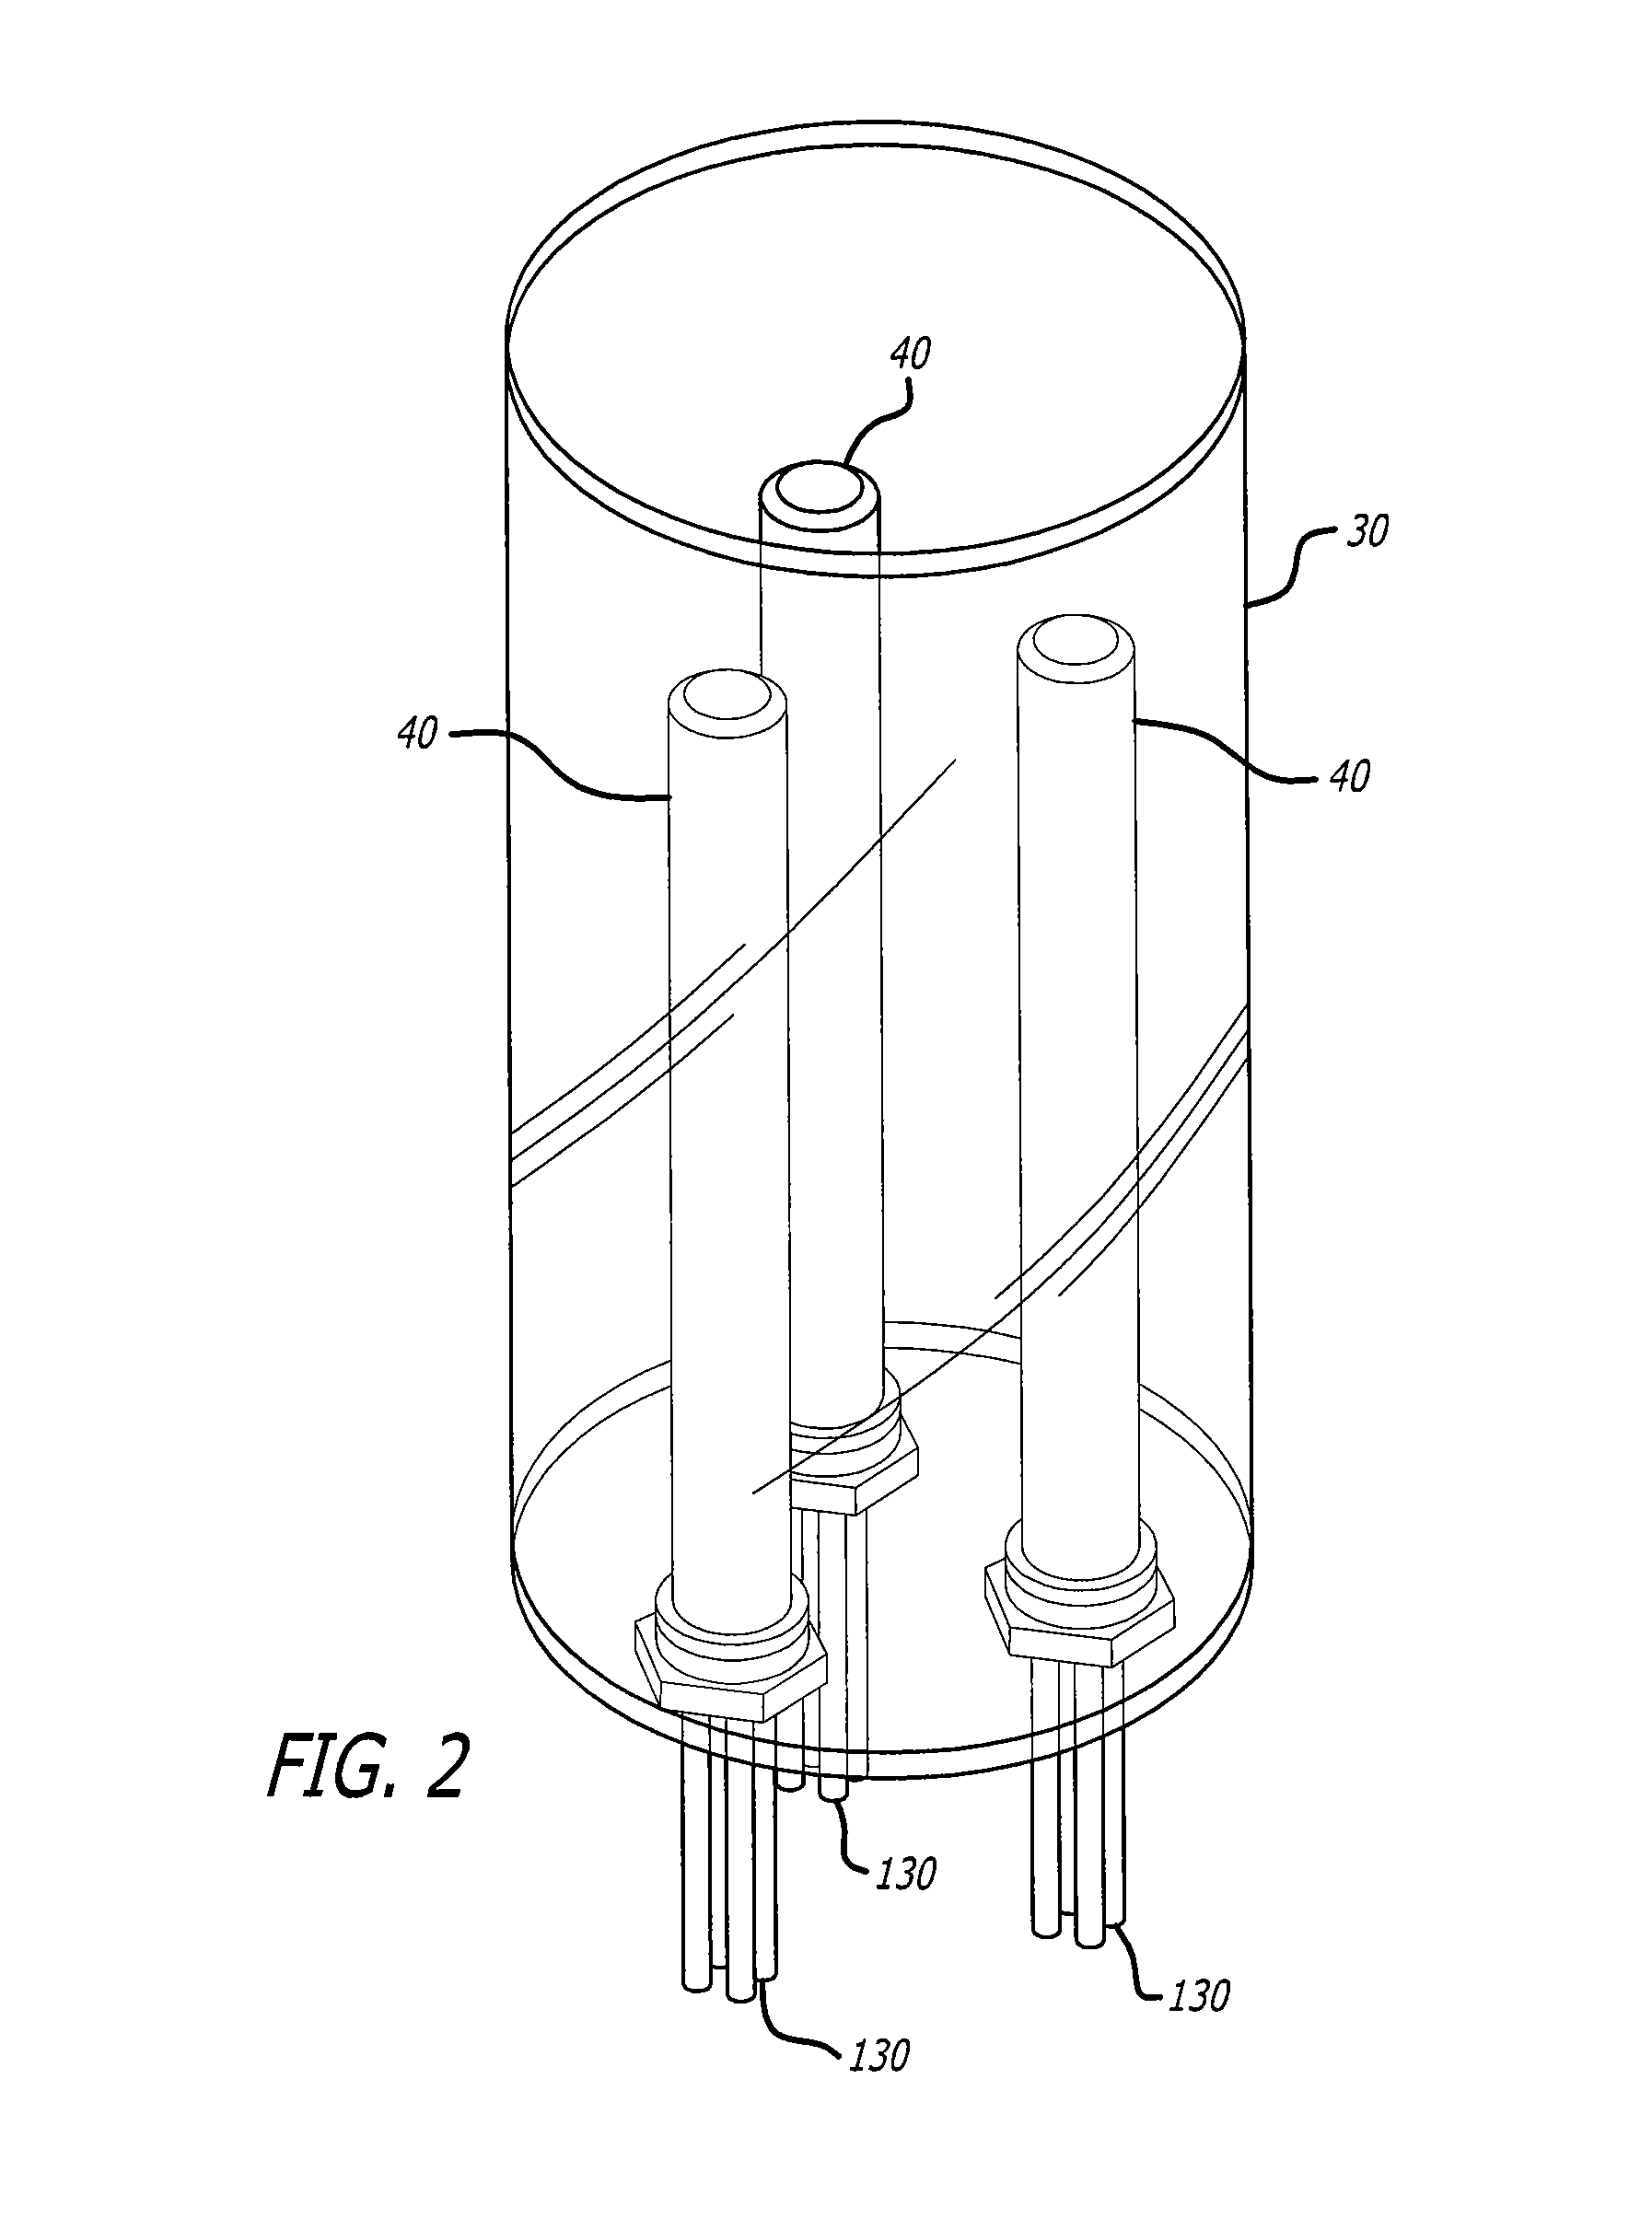 Modulated inline water heating system for aircraft beverage makers